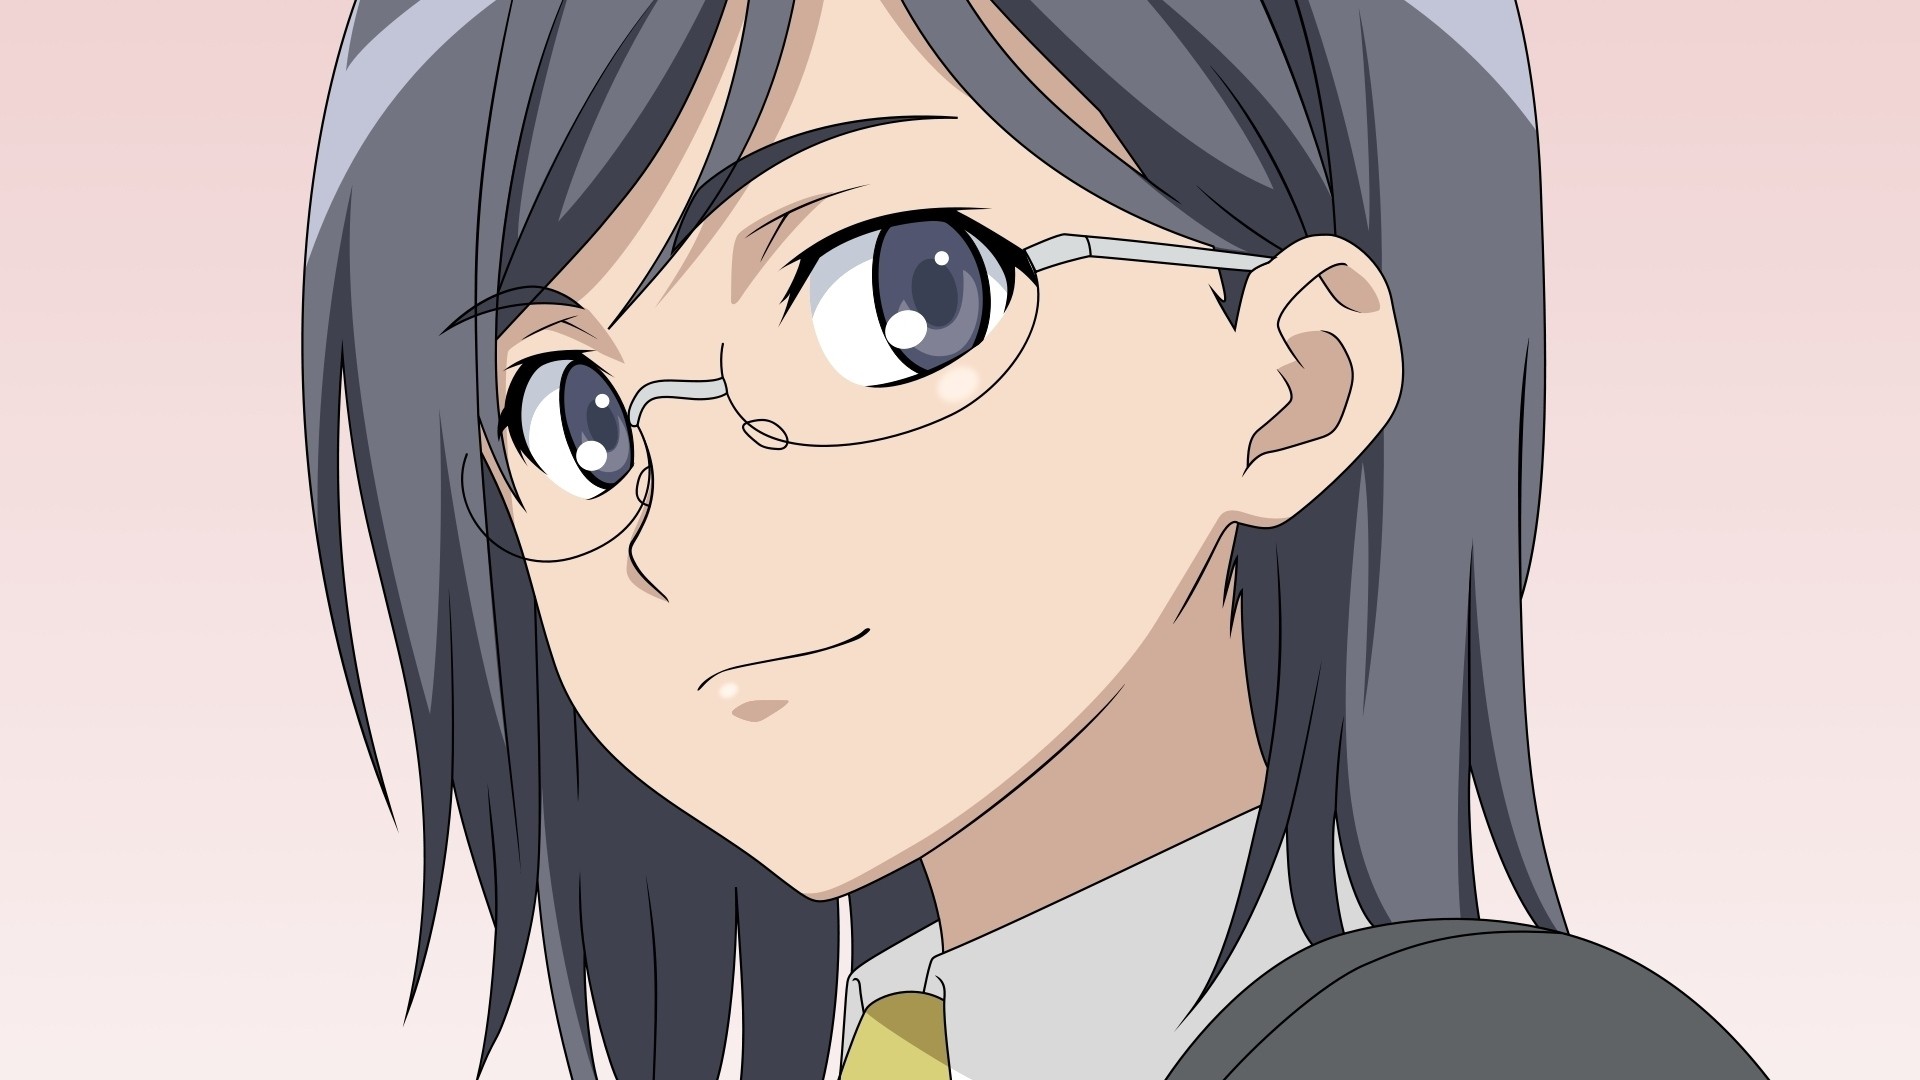 Anime Girl With Glasses Pic